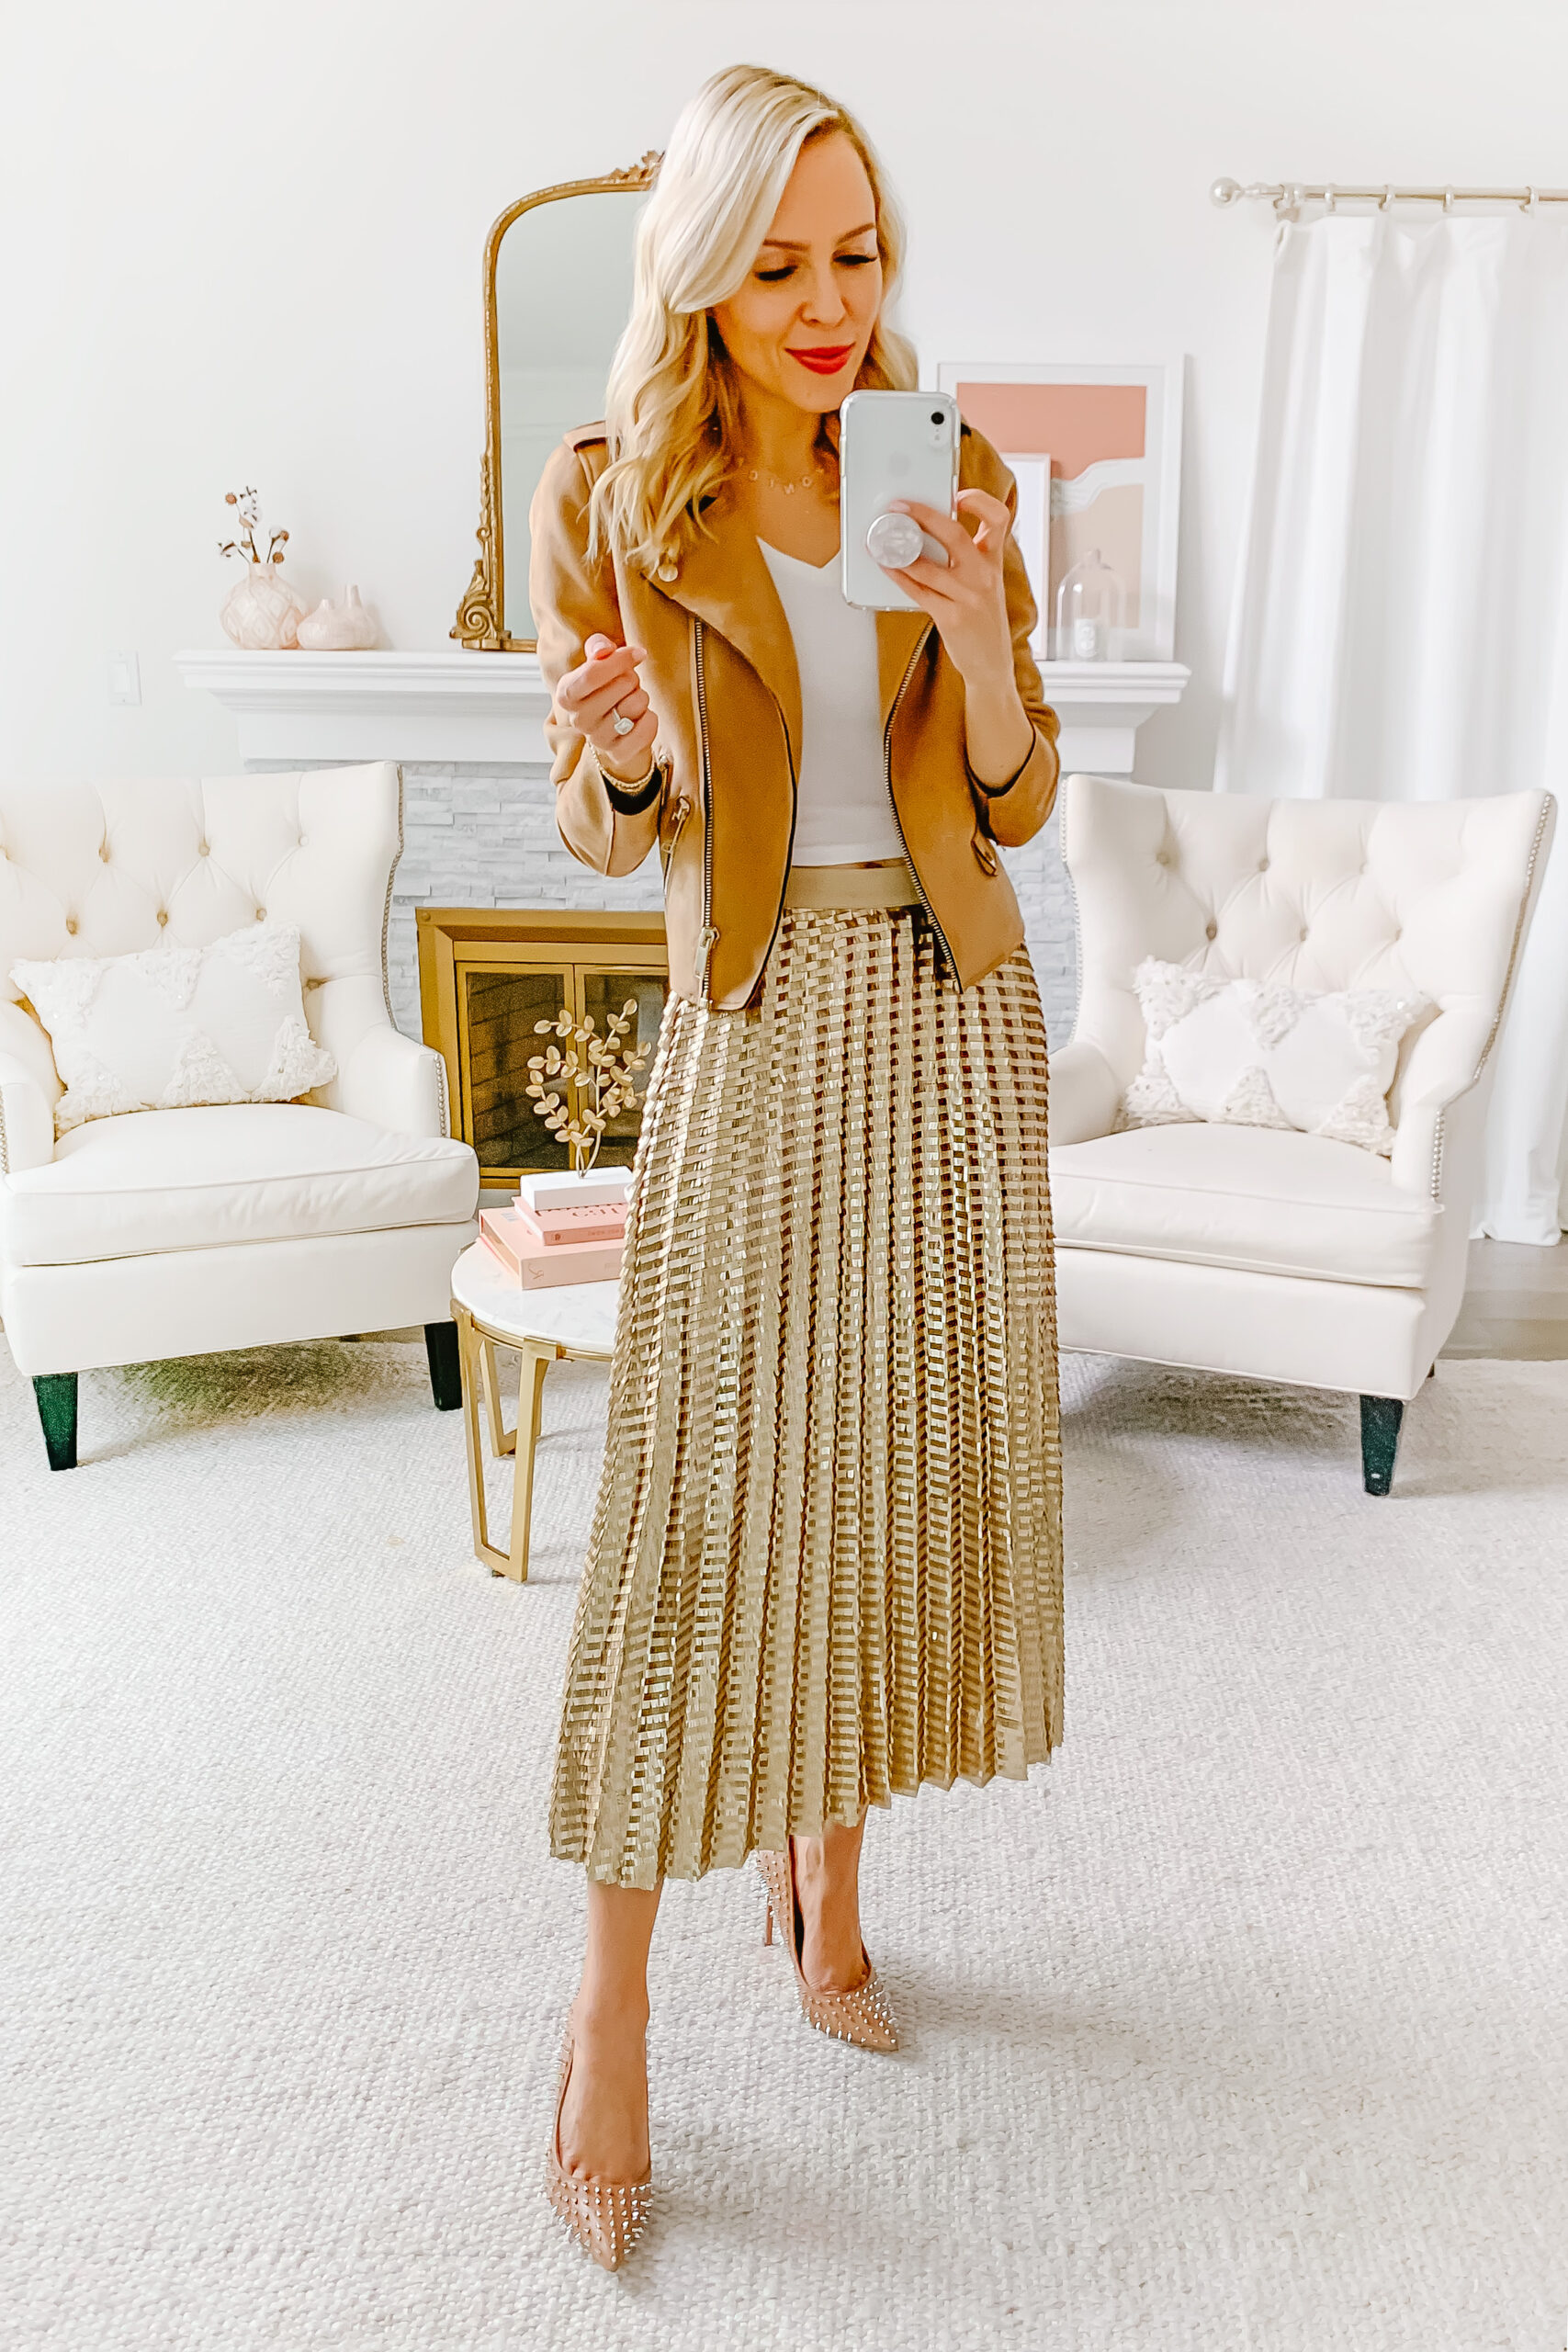 Anthropologie Natalia Sequined Midi Skirt, styled 5 ways by top San Francisco fashion blogger Lombard and Fifth.